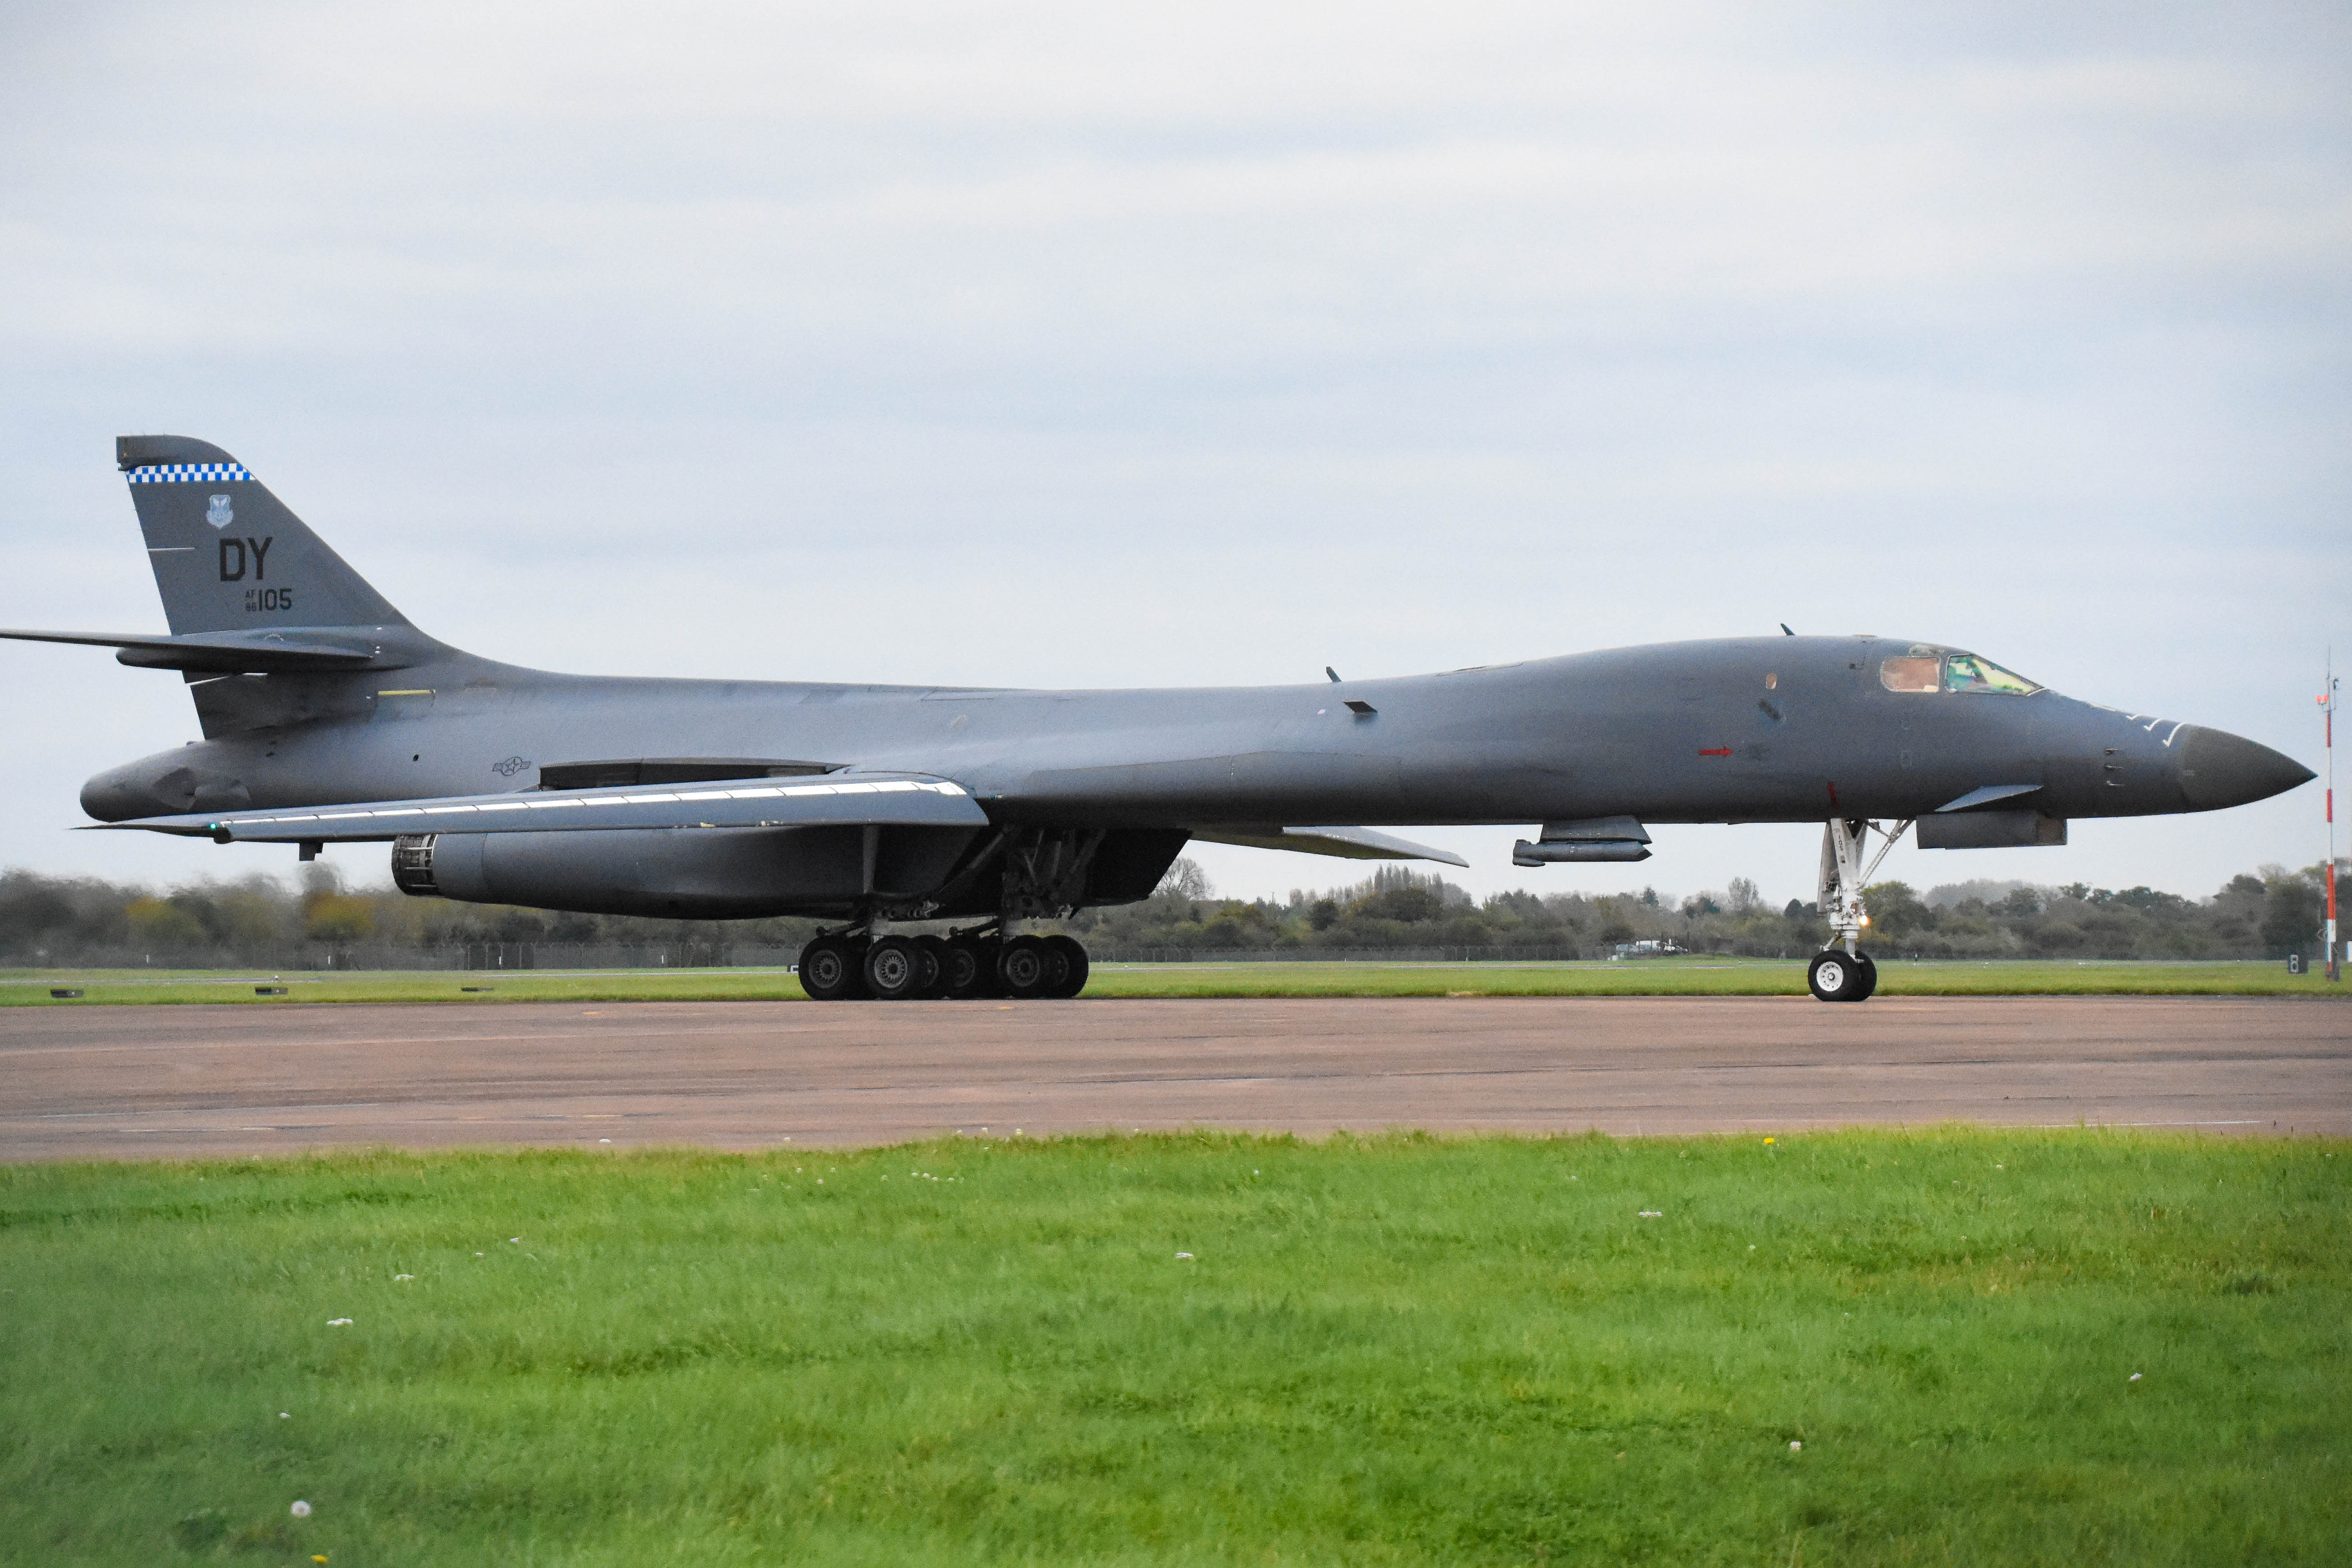 86-0105/860105 USAF - United States Air Force Rockwell B-1B Lancer Photo by colinw - AVSpotters.com